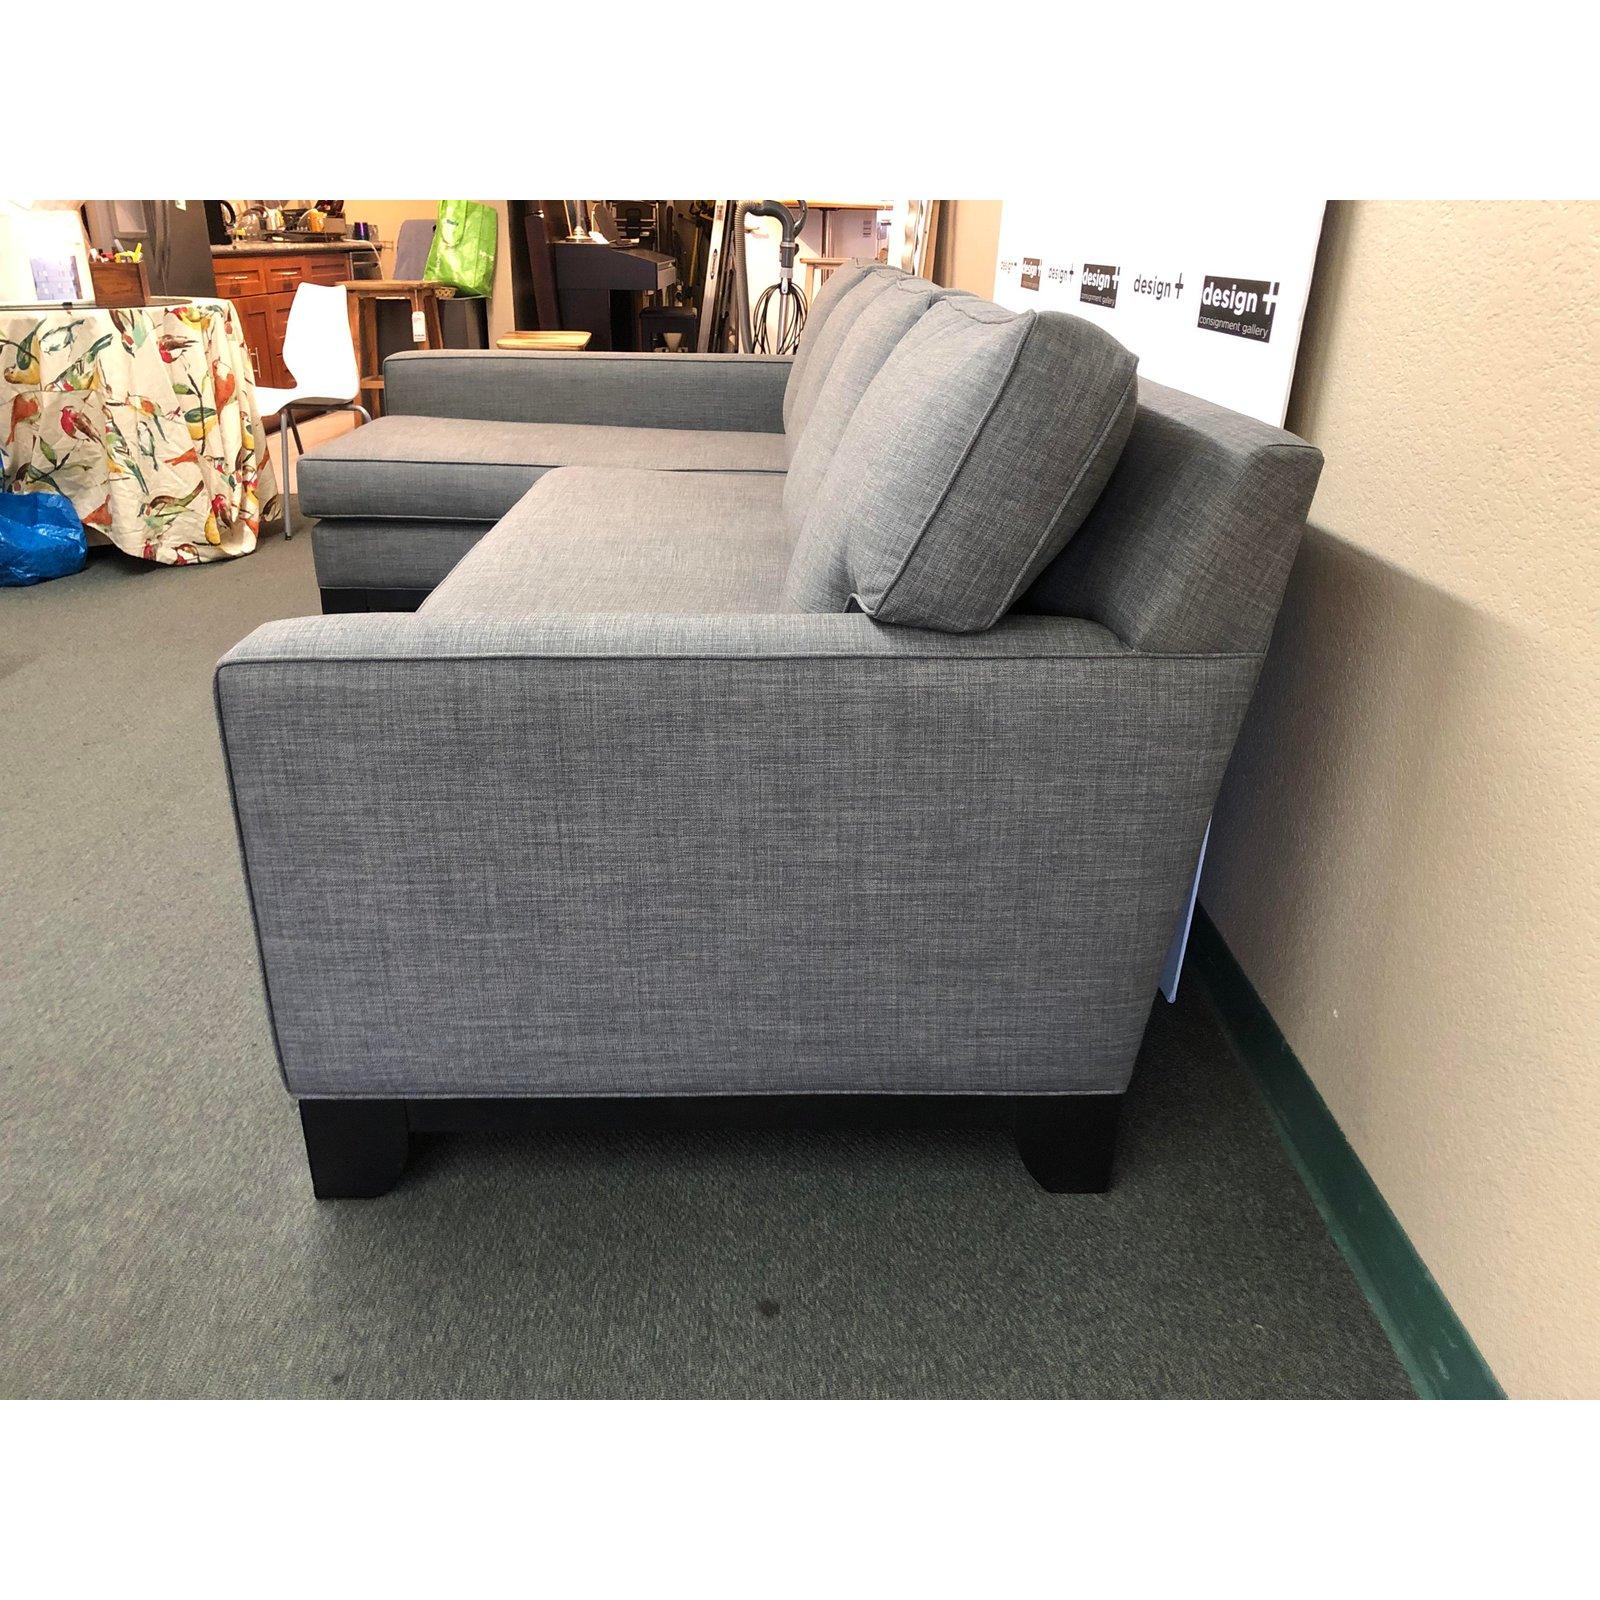 A contemporary two-piece sectional by Nathan Anthony. Simple lines and roomy comfort are the story. Looses back and seats are foam filled cushions. The upholstery is a woven gray and white with self welting.

Measures: Sofa: 81”W x 39”D x